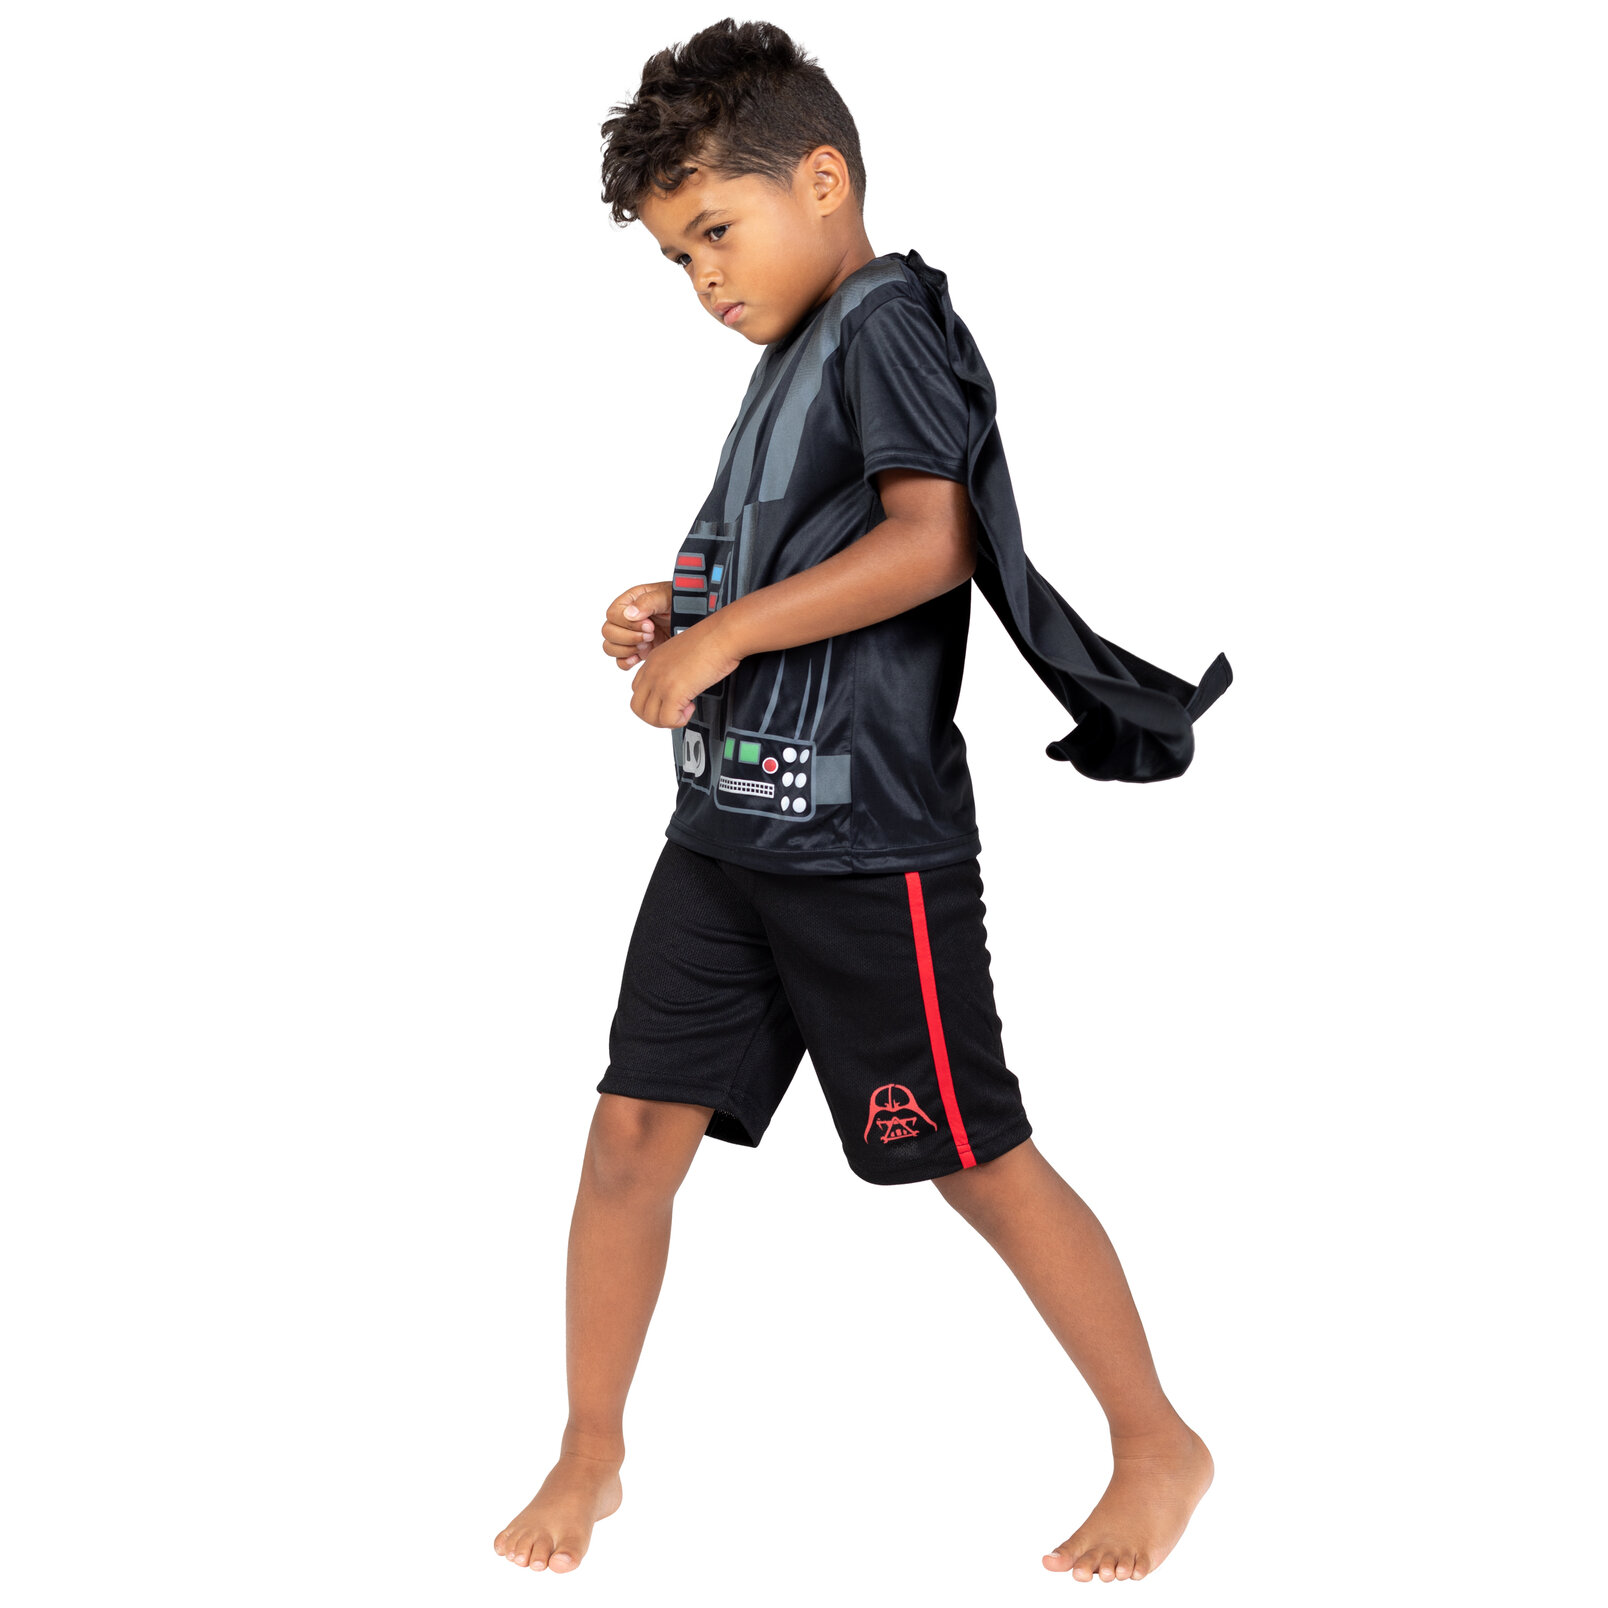 Star Wars Darth Vader Toddler Boys Costume T-Shirt Shorts and Cape 3 Piece Toddler to Big Kid - image 4 of 5